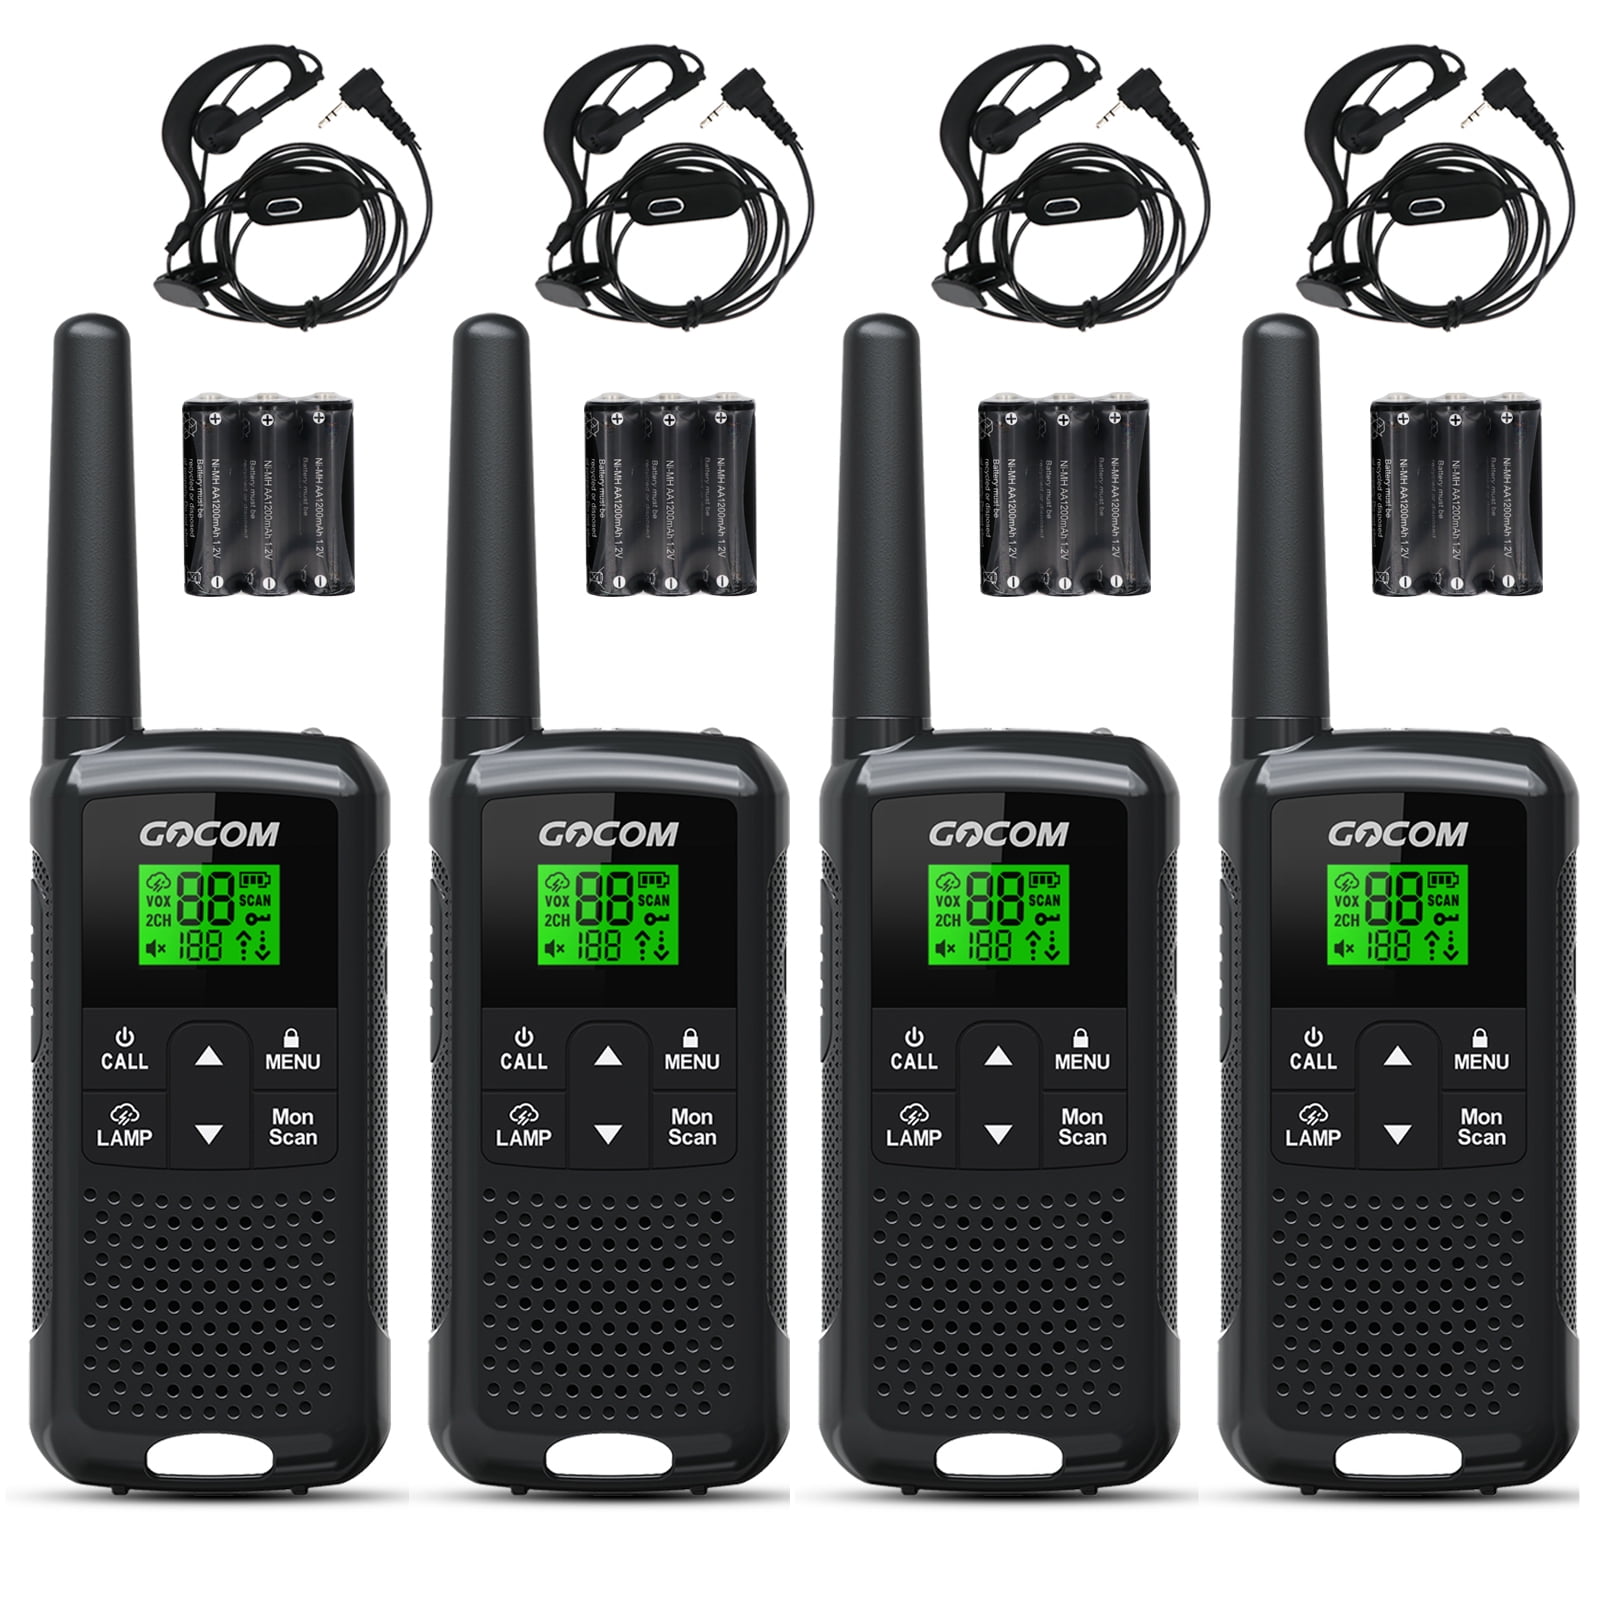 GOCOM G200 Walkie Talkies for Adults, Rechargeable Long Range Walkie Talkies  with LED Lamplight, VOX  Flashlight for (4 Pack)